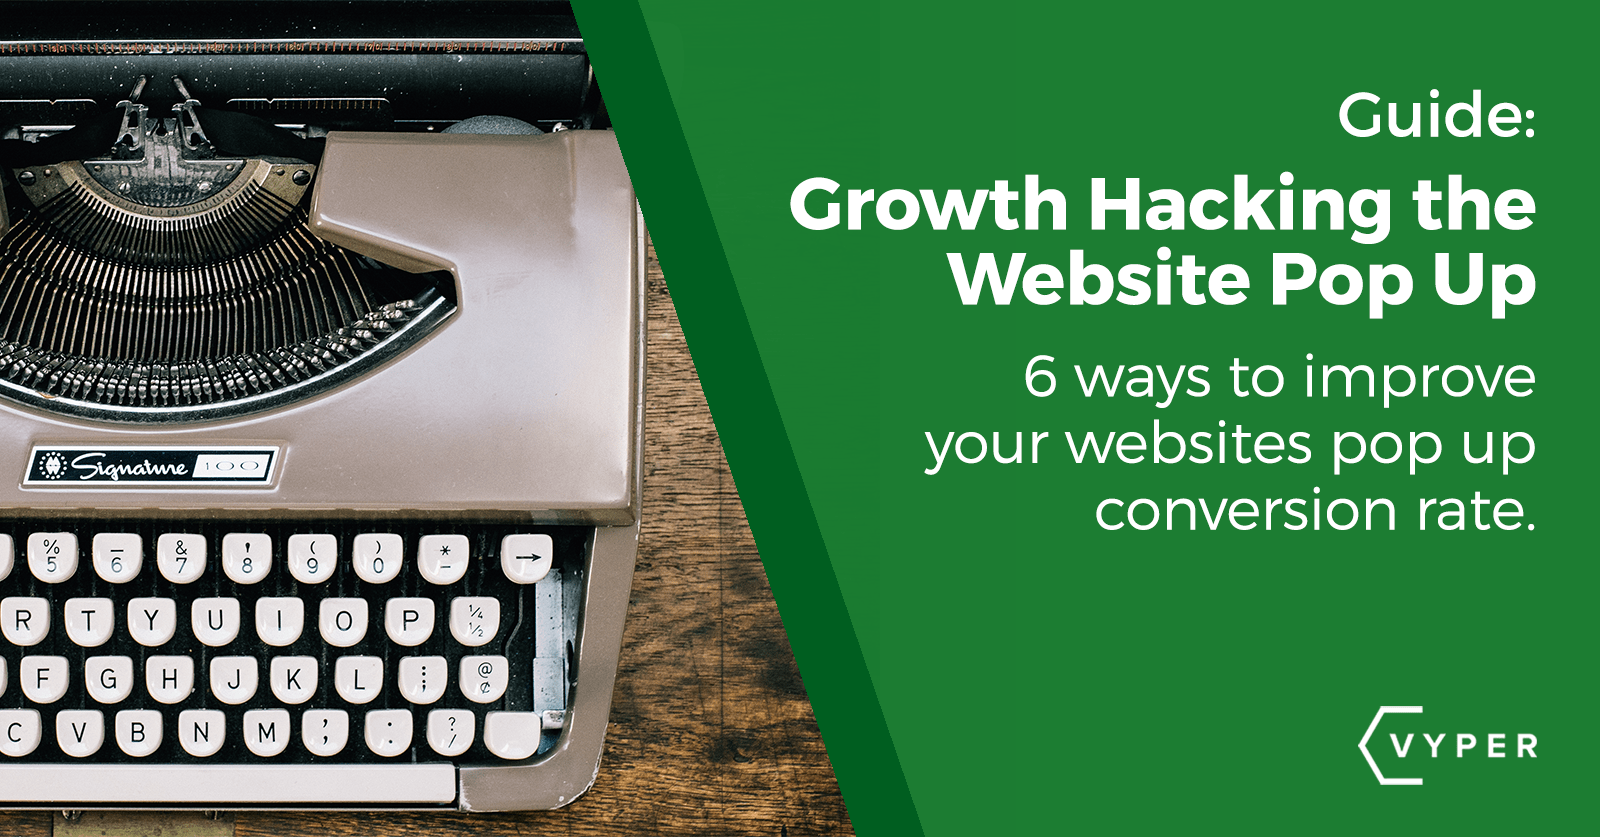 6 Ways to Improve Your Website Popup Conversion Rate